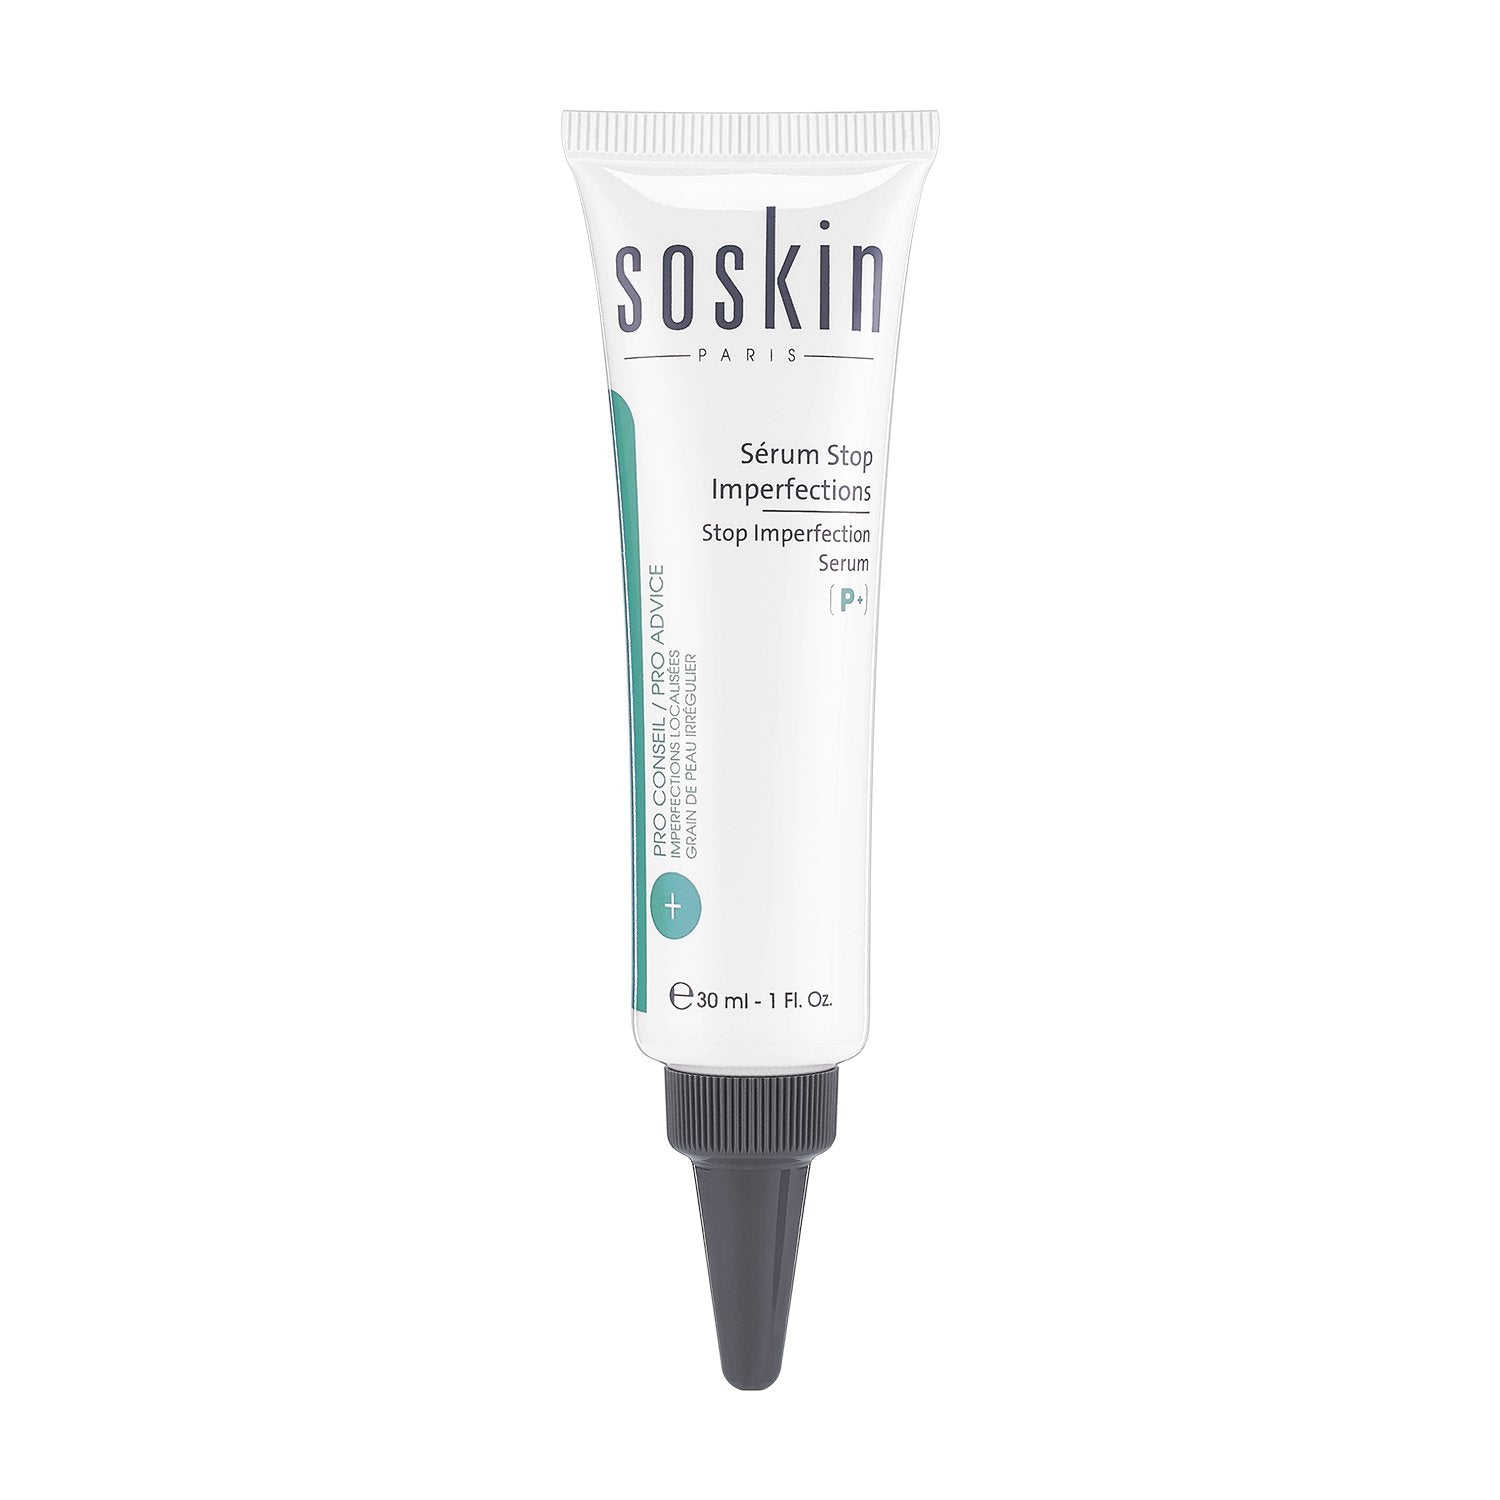 Soskin serum stop imperfections 30ml